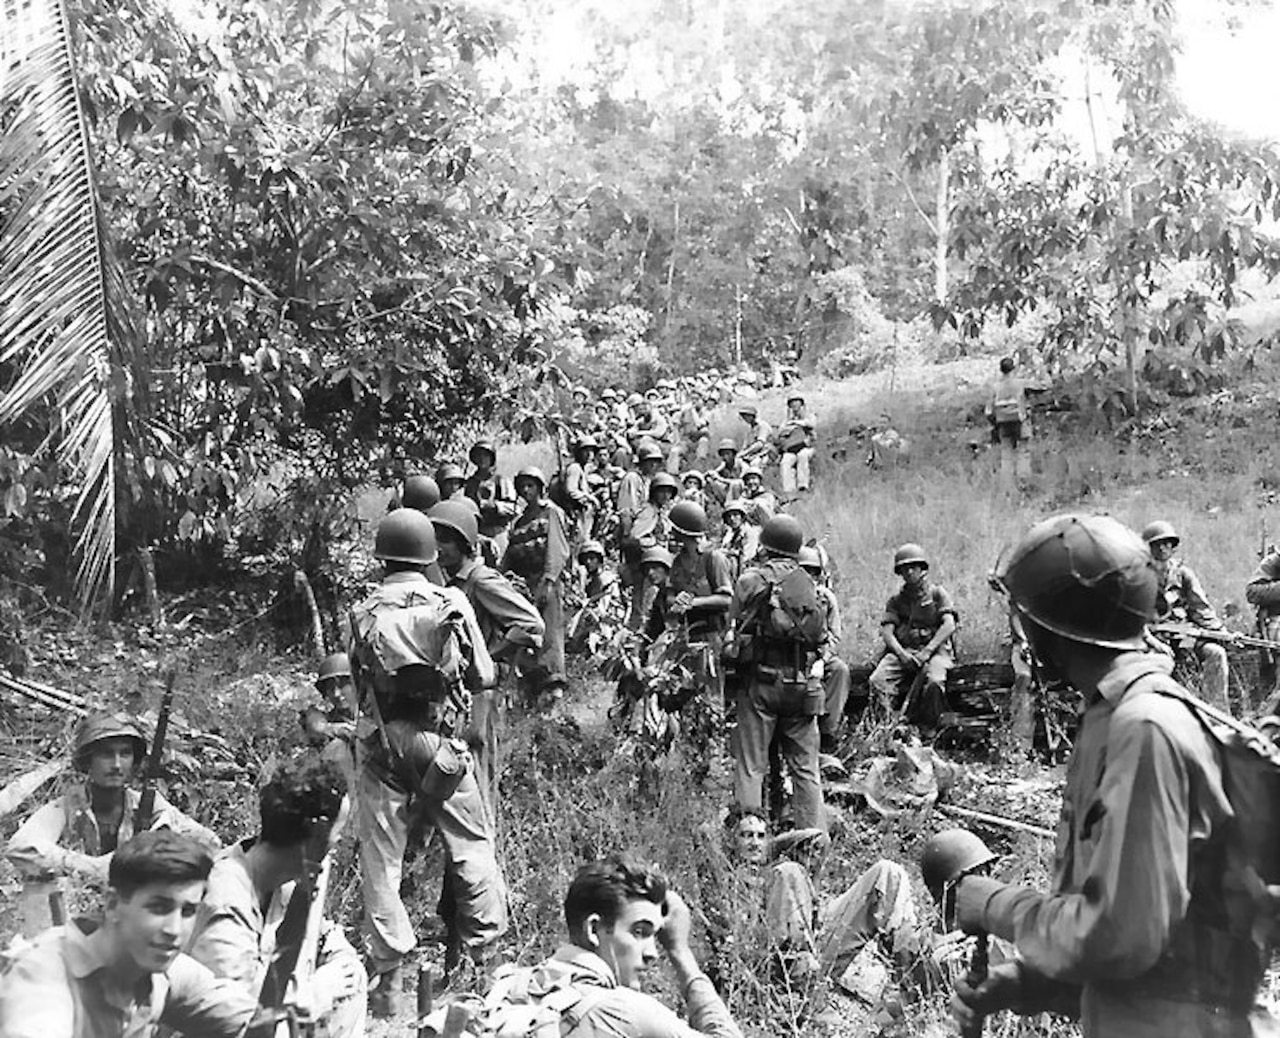 Marines rest in a jungle area.